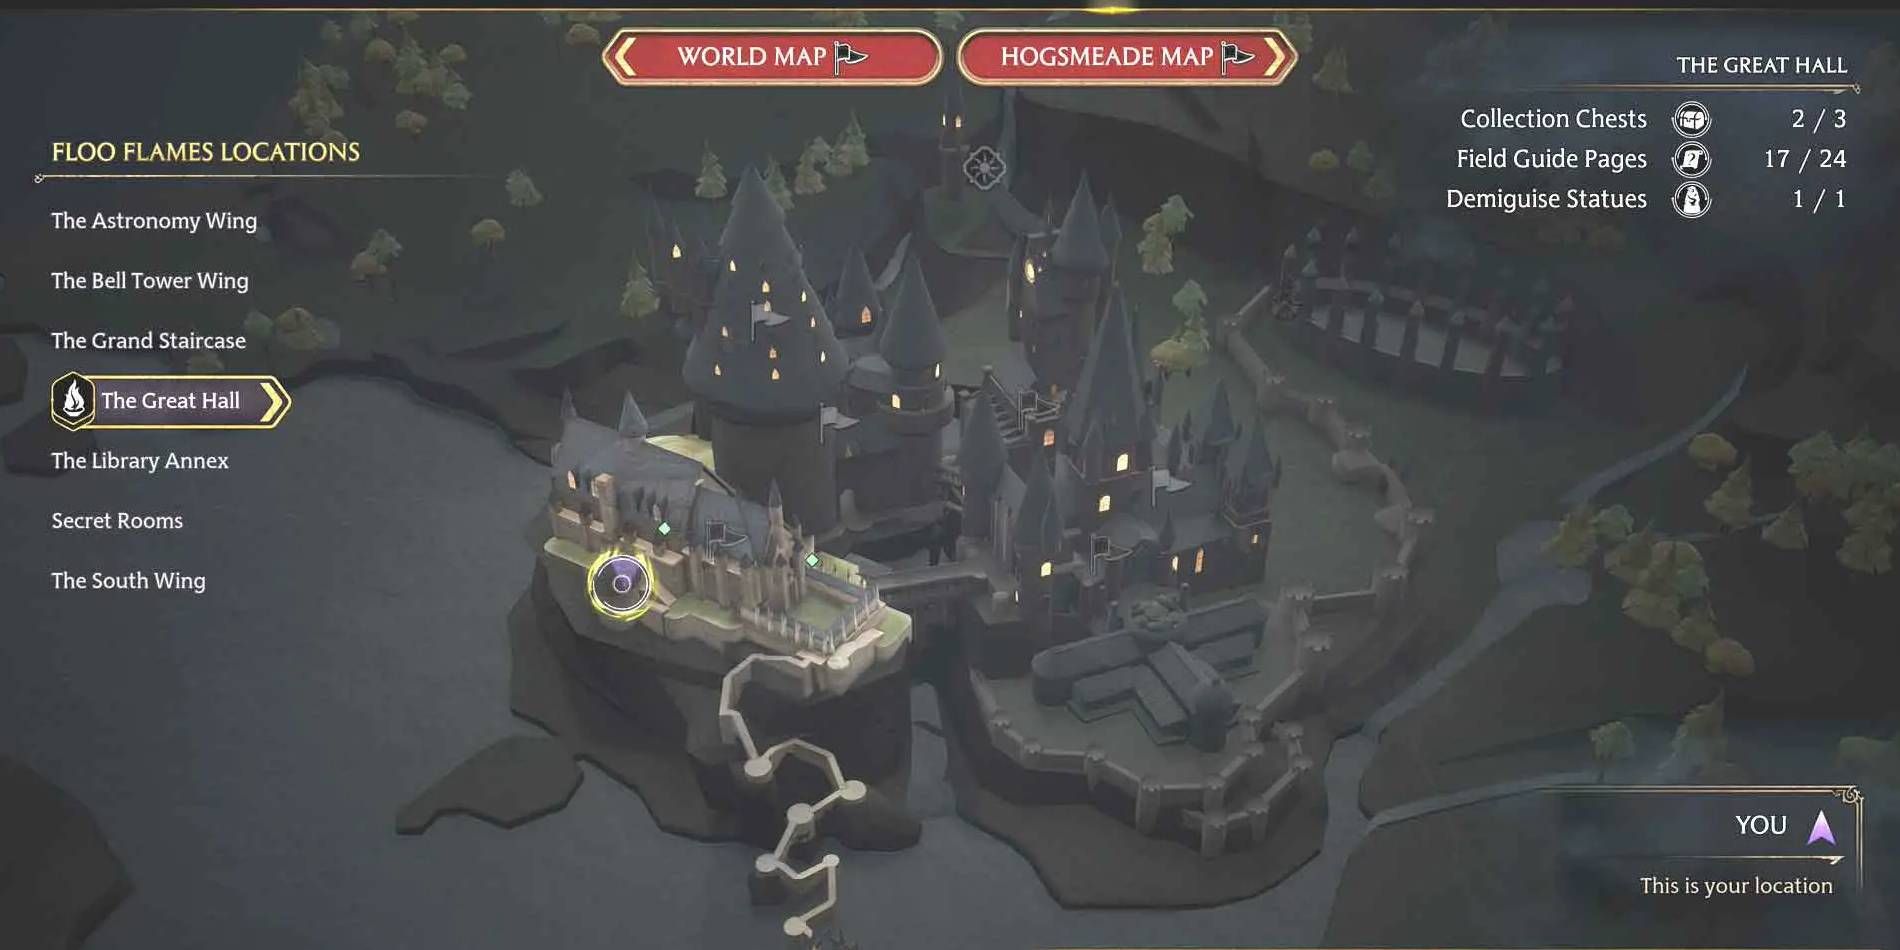 Hogwarts Legacy The Great Hall Map Location with Collectibles, Player Location, and Floo Flame Fast Travel Spots Displayed